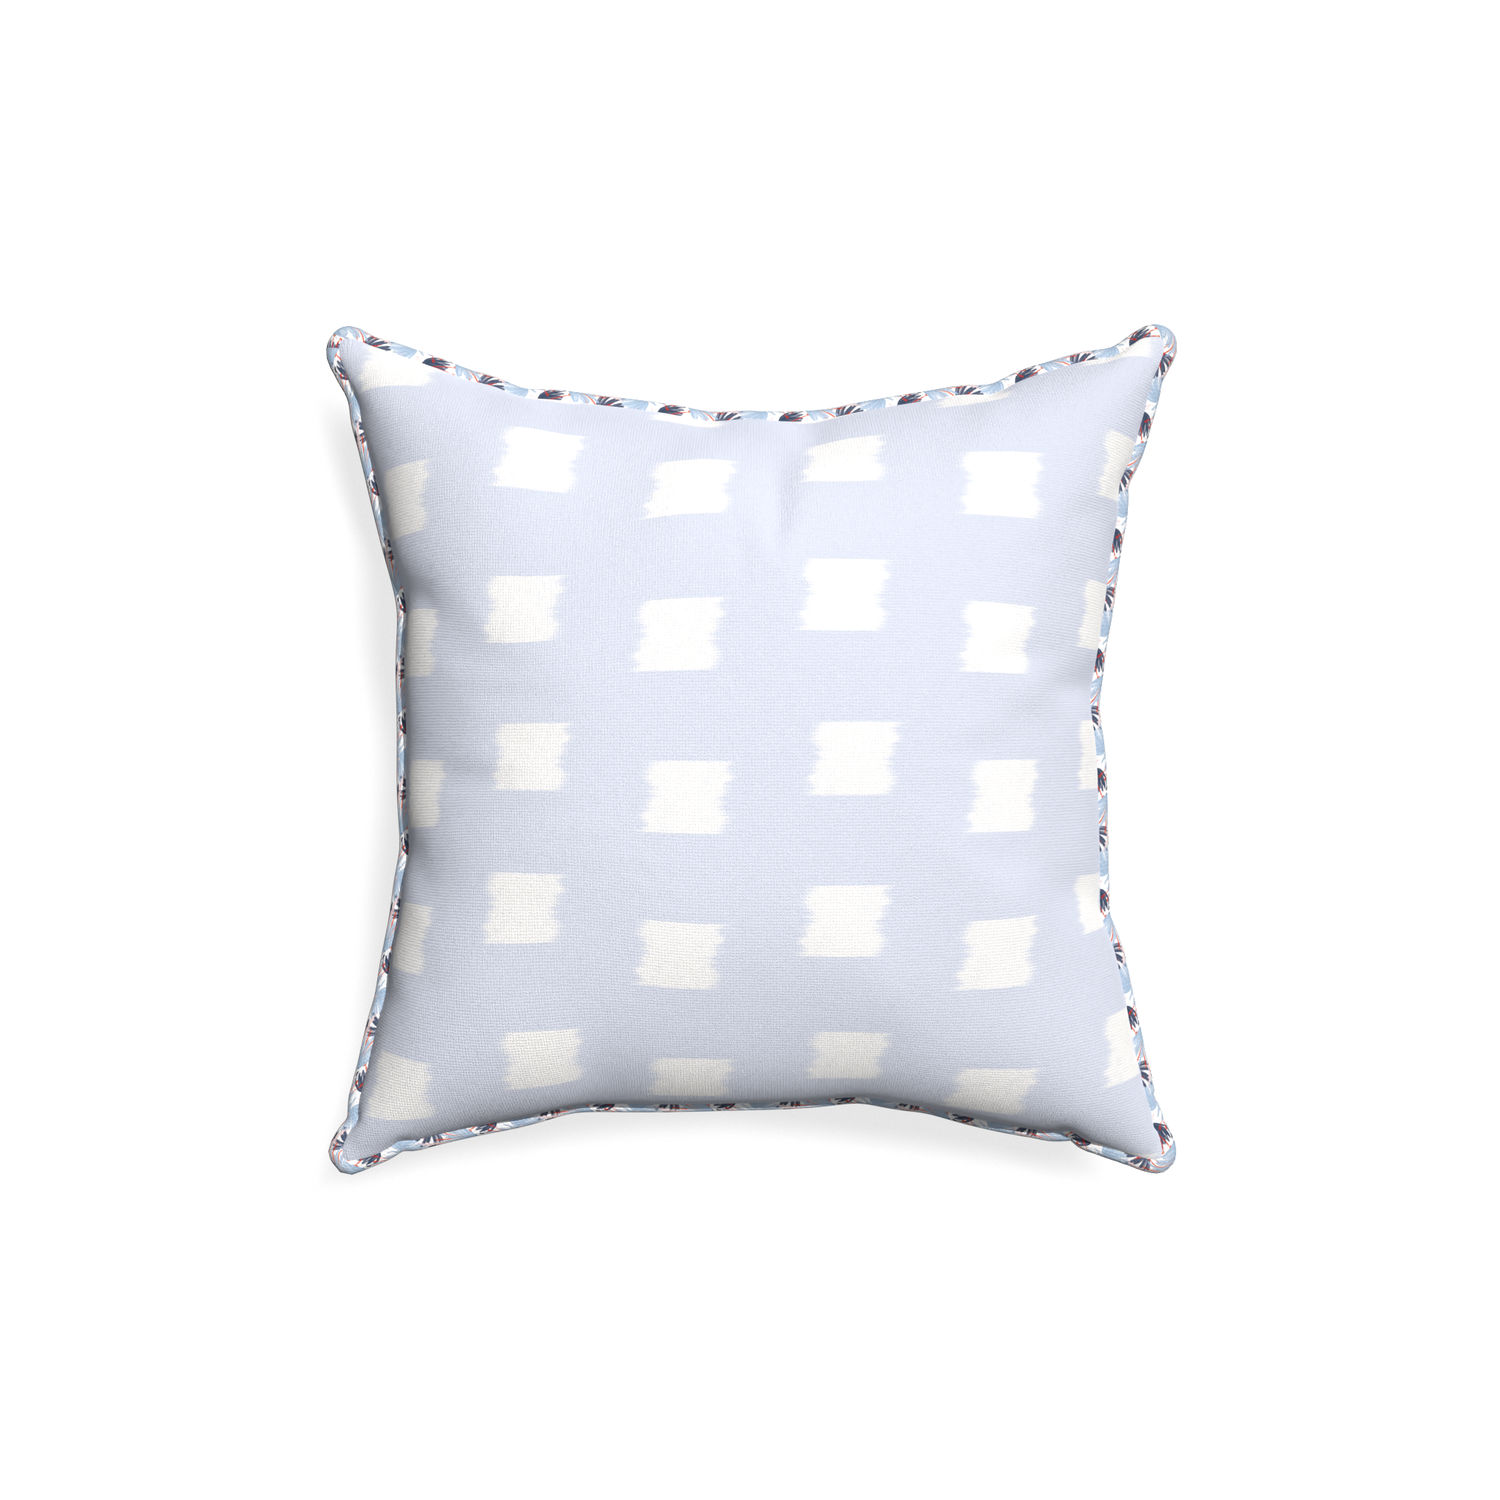 18-square denton custom sky blue patternpillow with e piping on white background